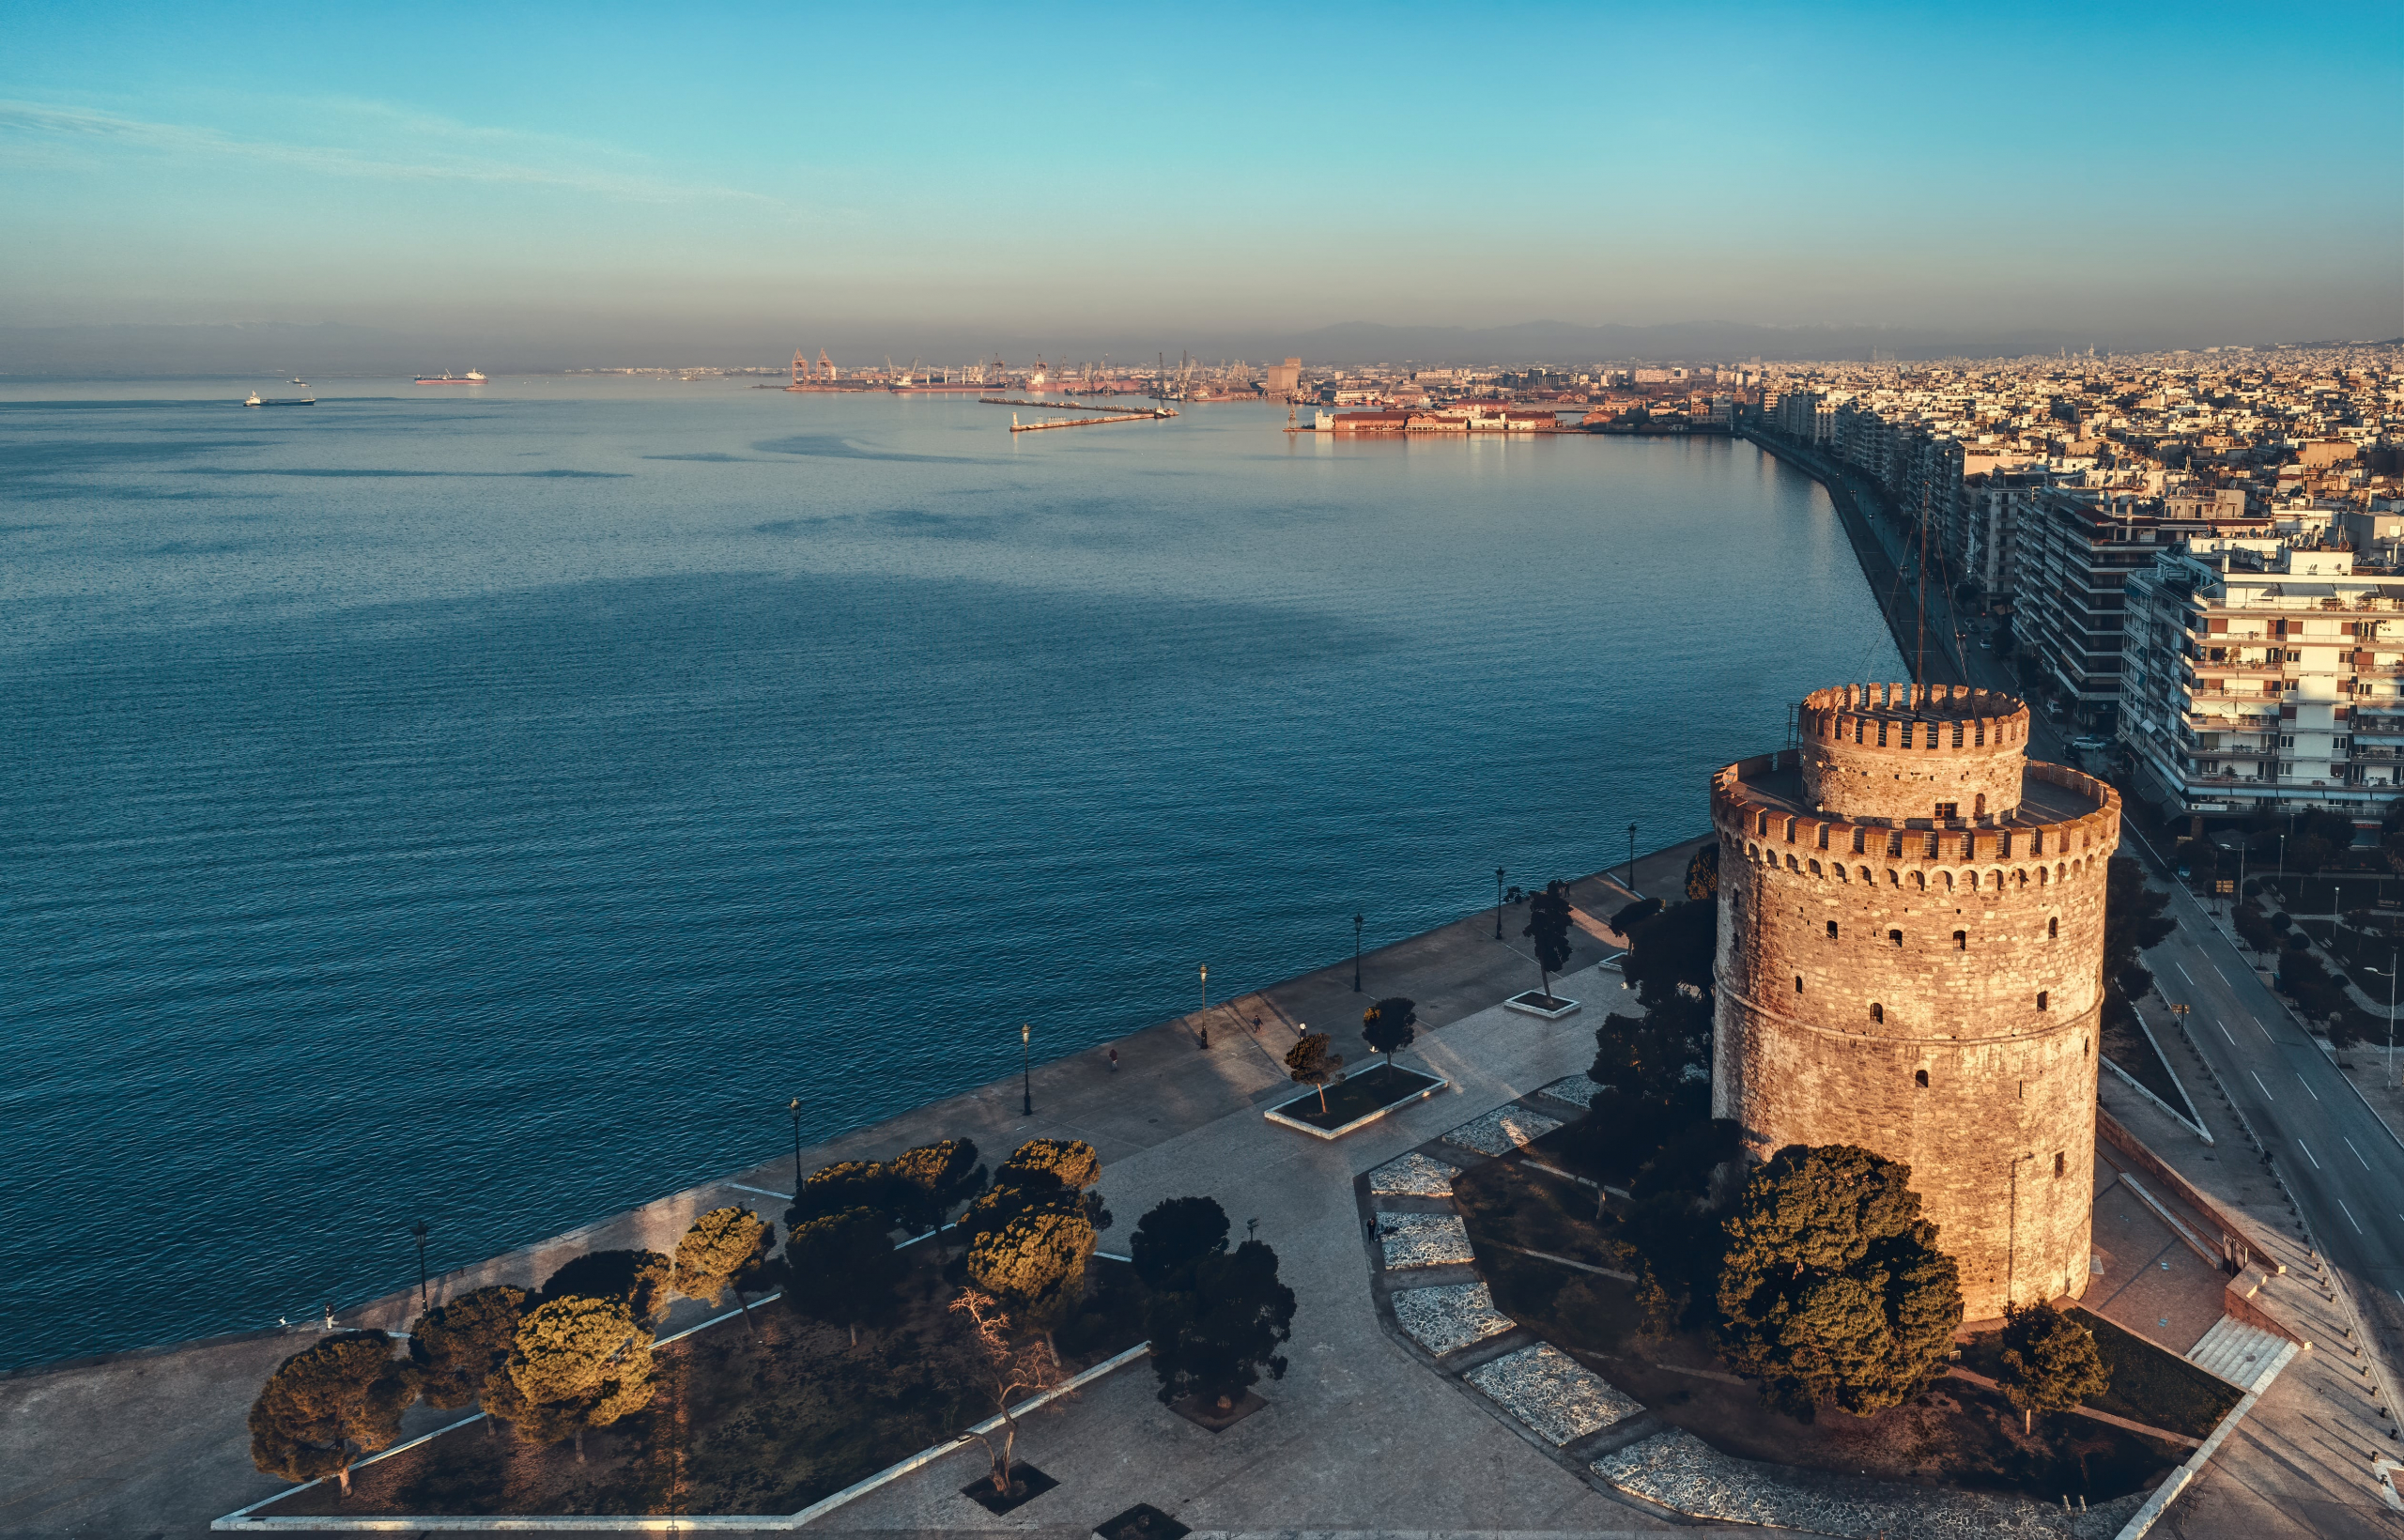 The competition for the deck on the old beach of Thessaloniki is to be shortly announced